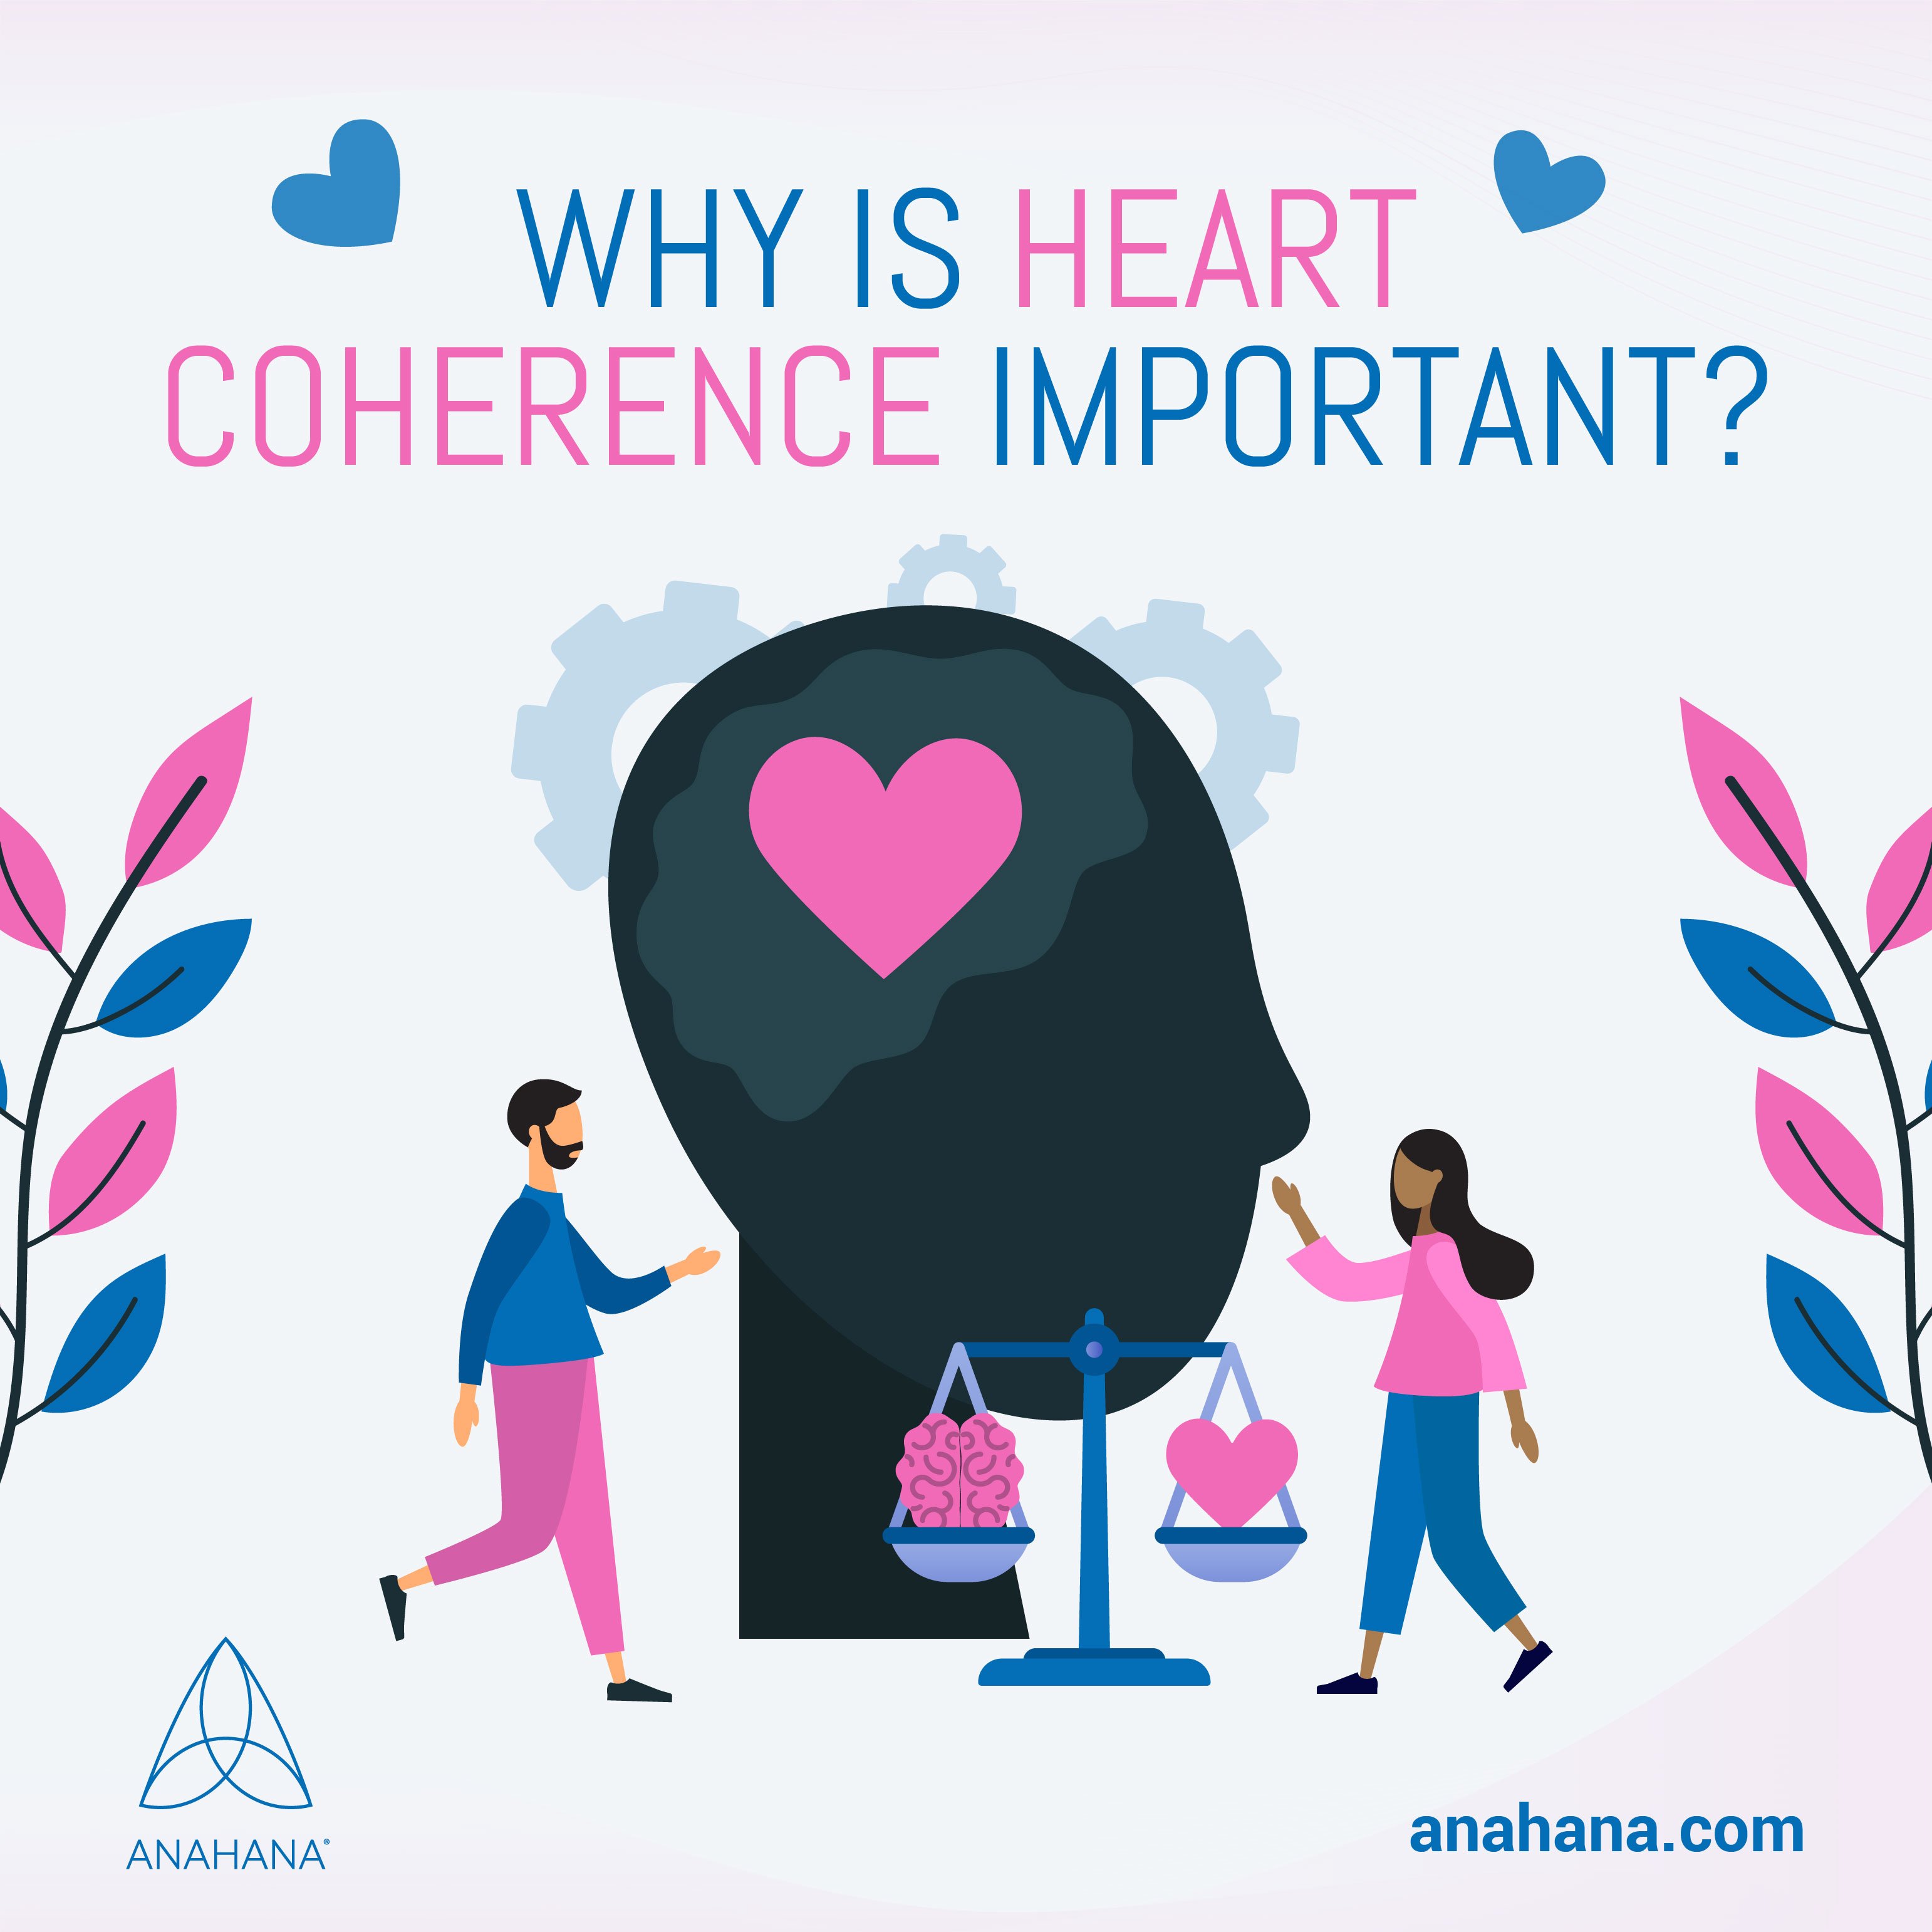 Why is heart coherence important?